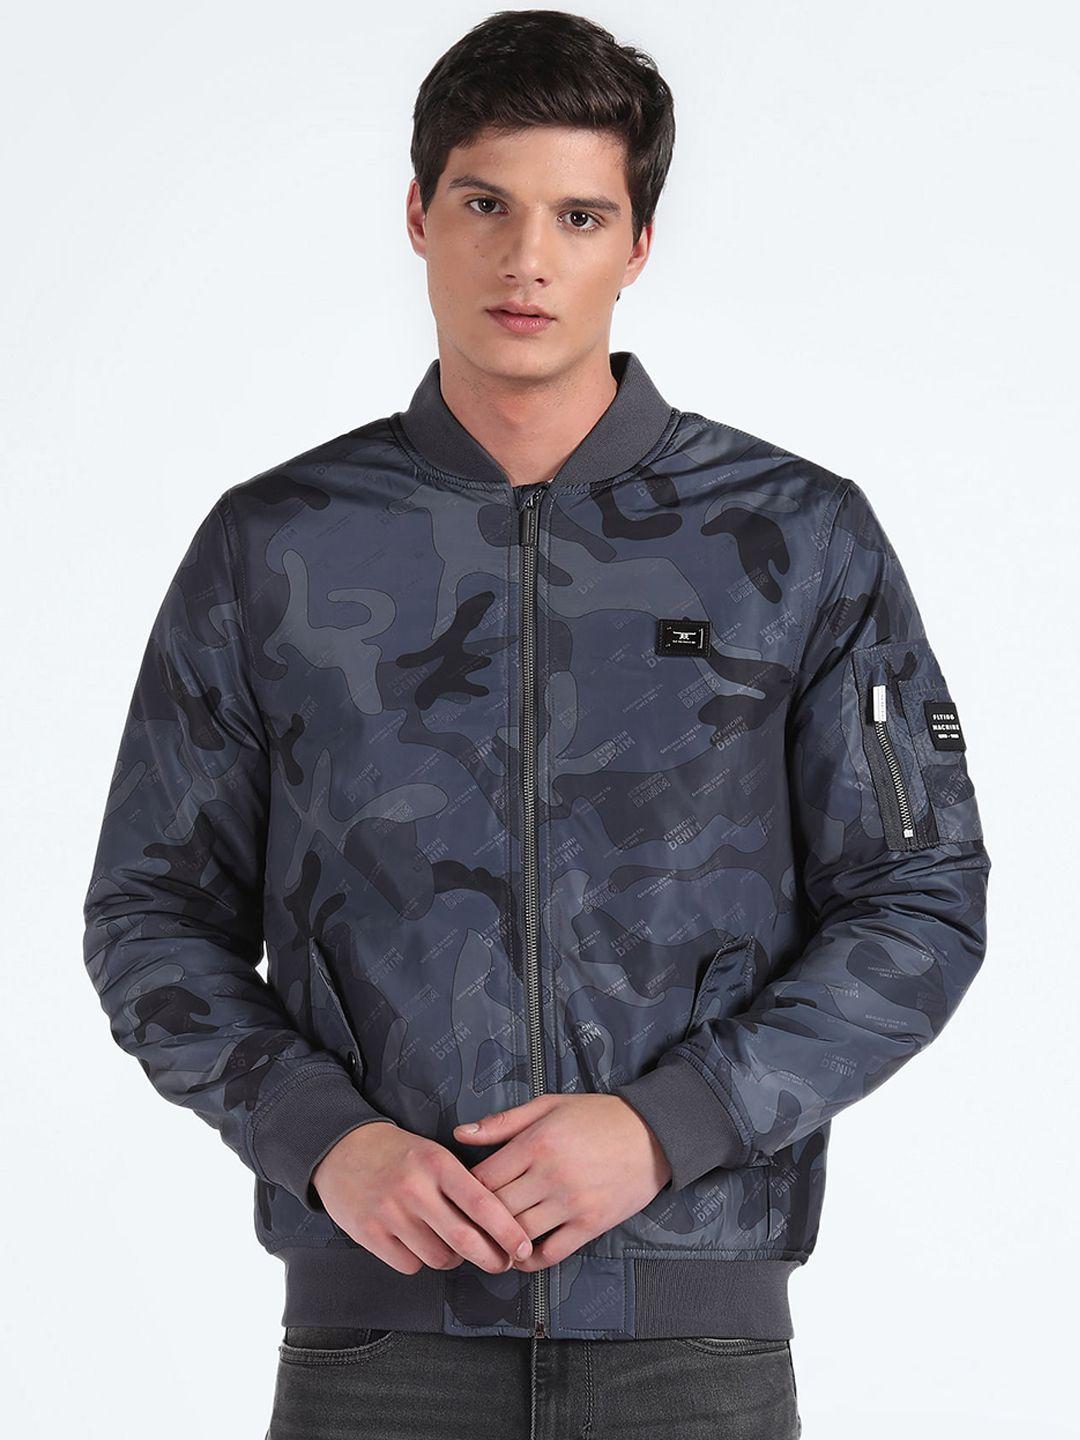 flying machine camouflage printed stand collar long sleeves bomber jacket